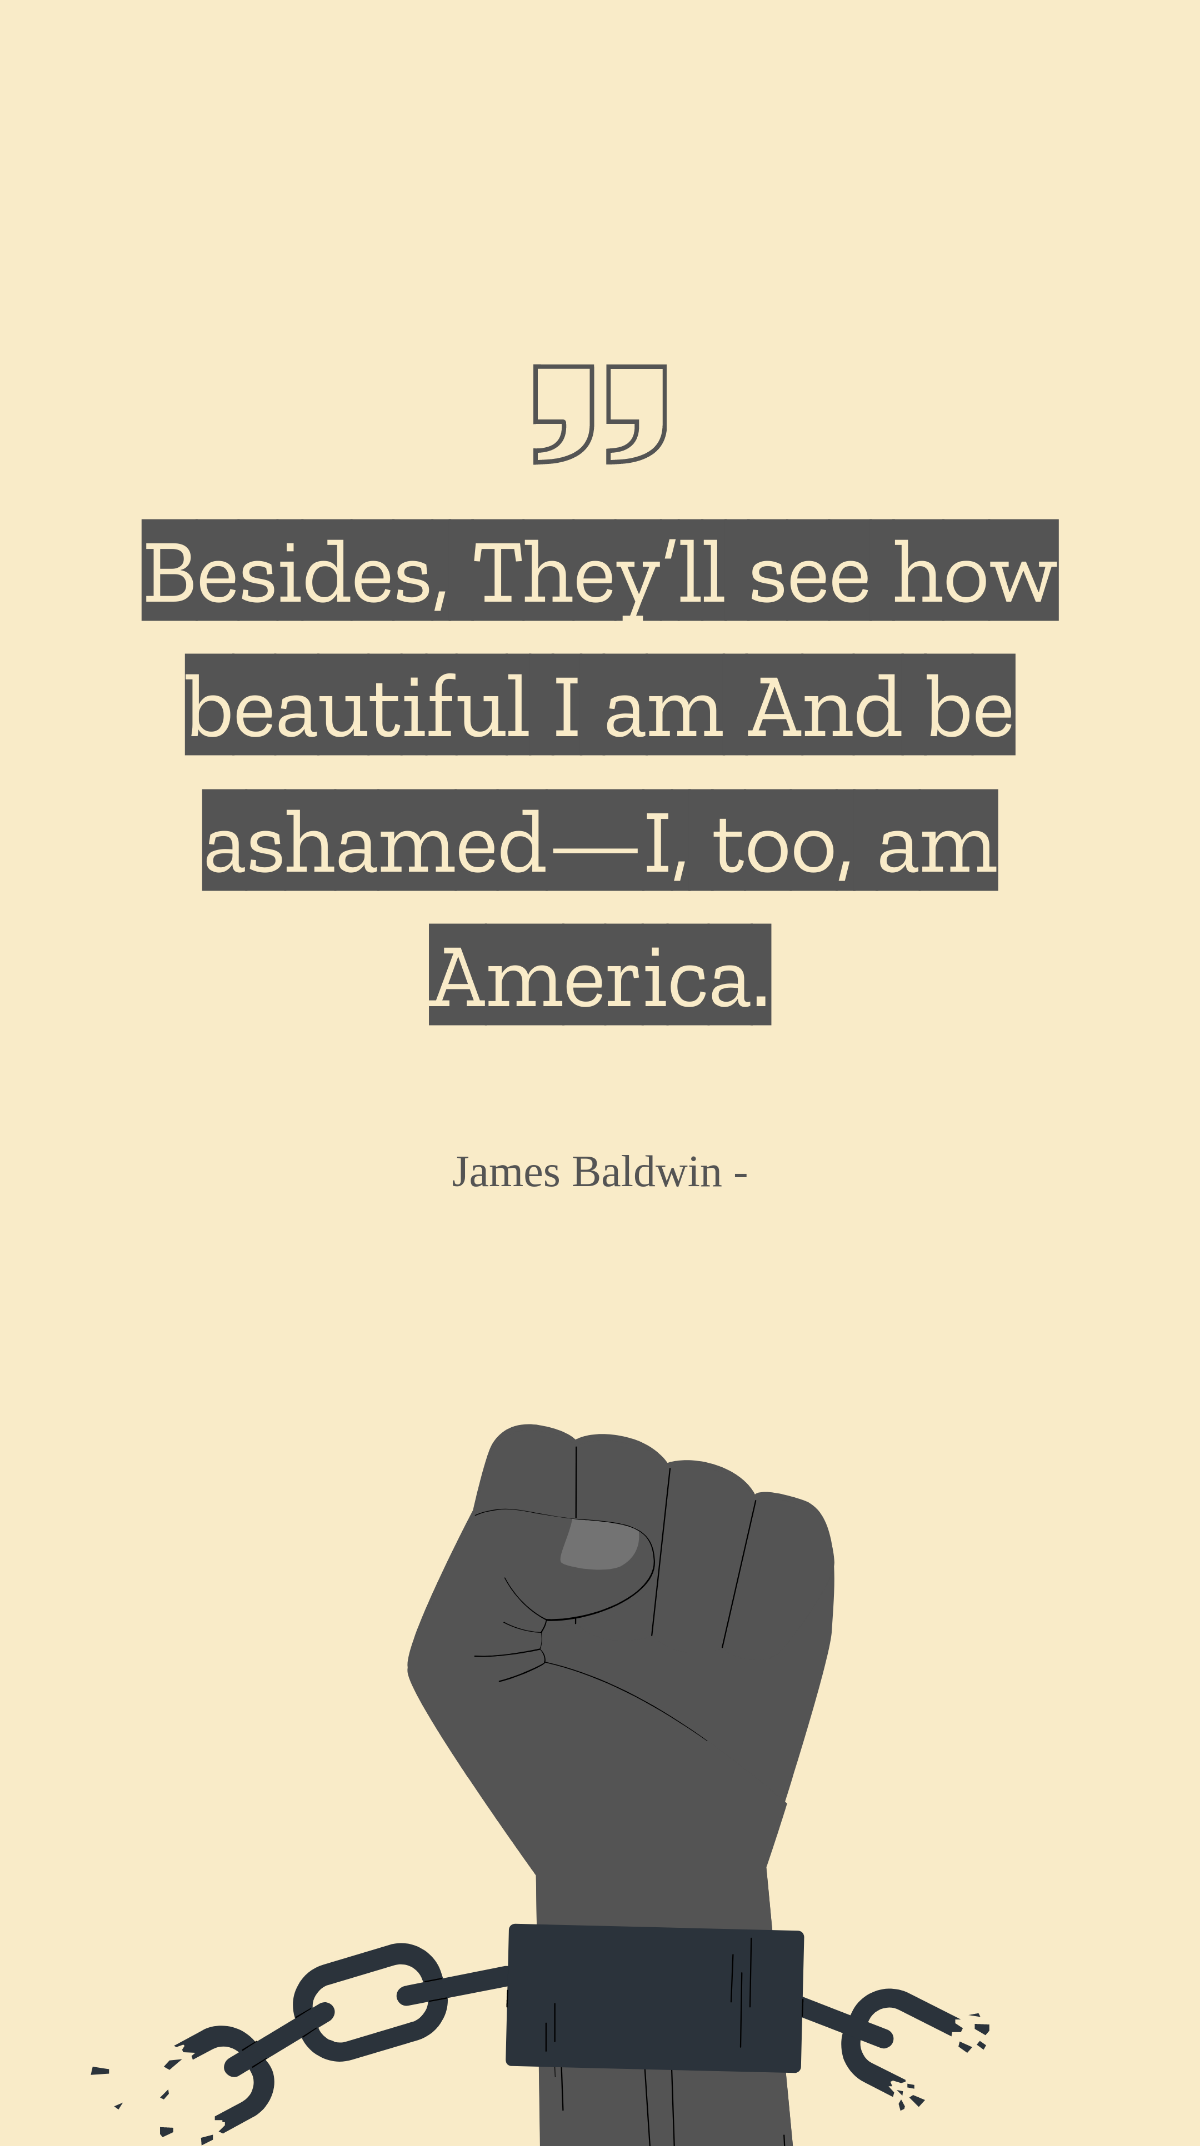 James Baldwin - Besides, They’ll see how beautiful I am And be ashamed—I, too, am America.